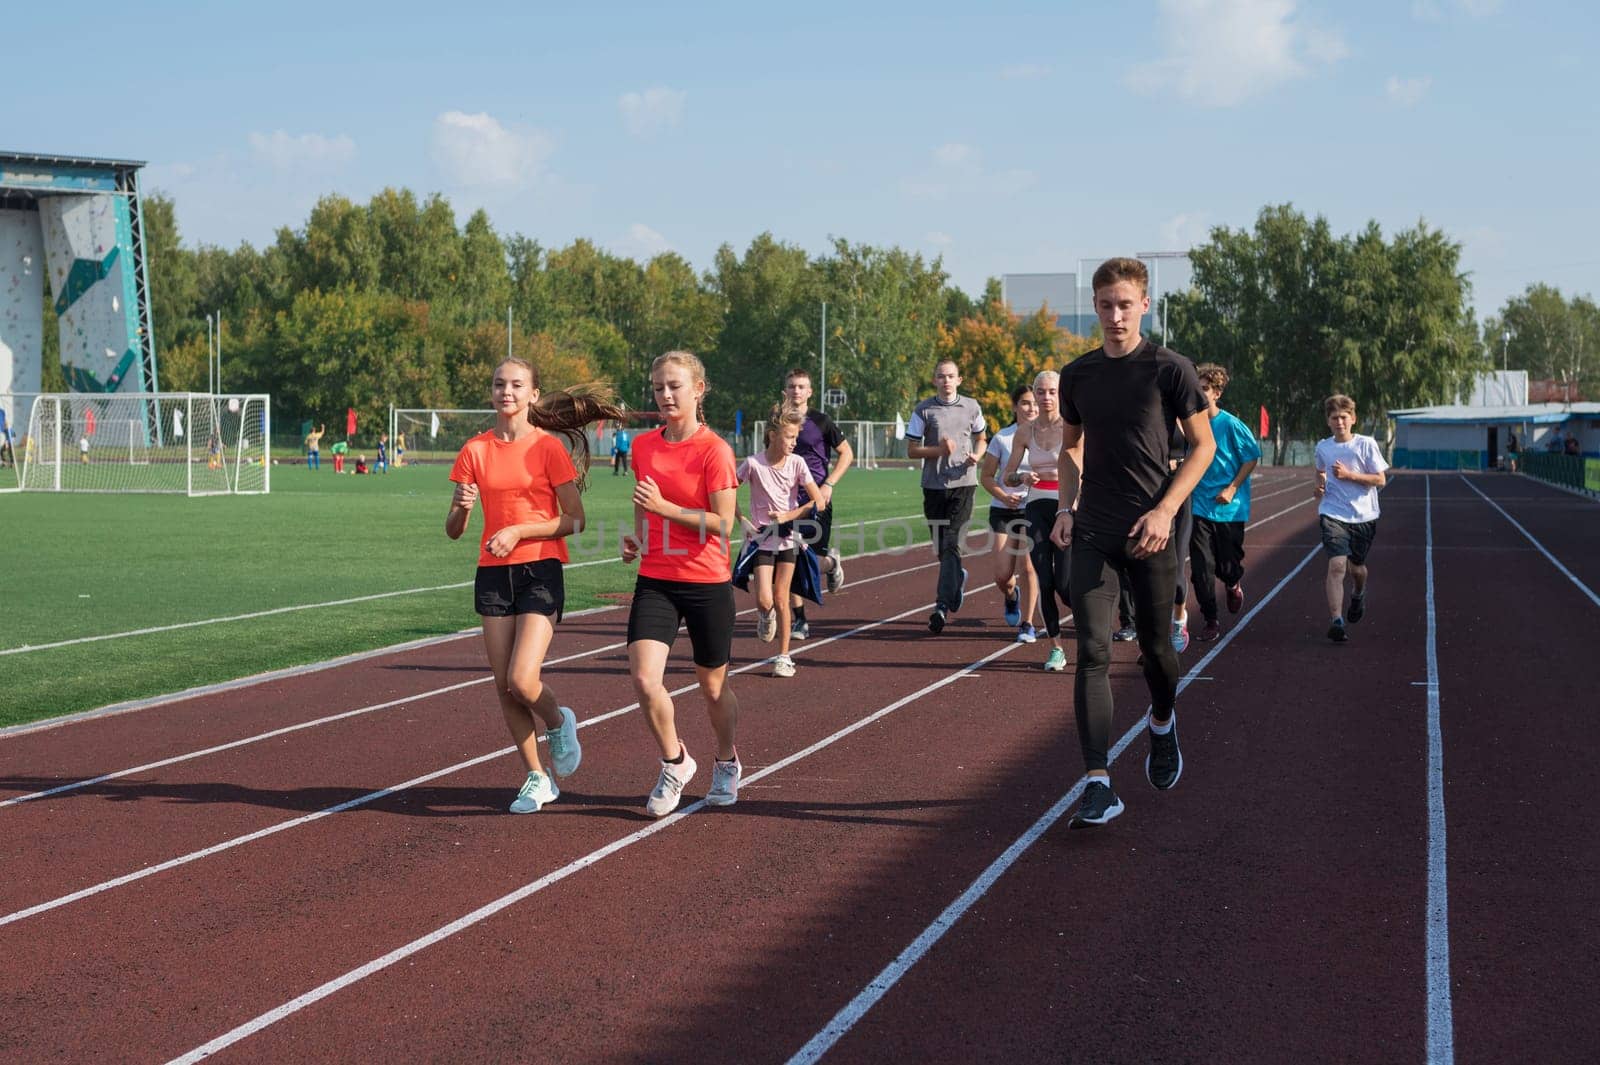 Group of young athlete runnner are training at the stadium outdoors